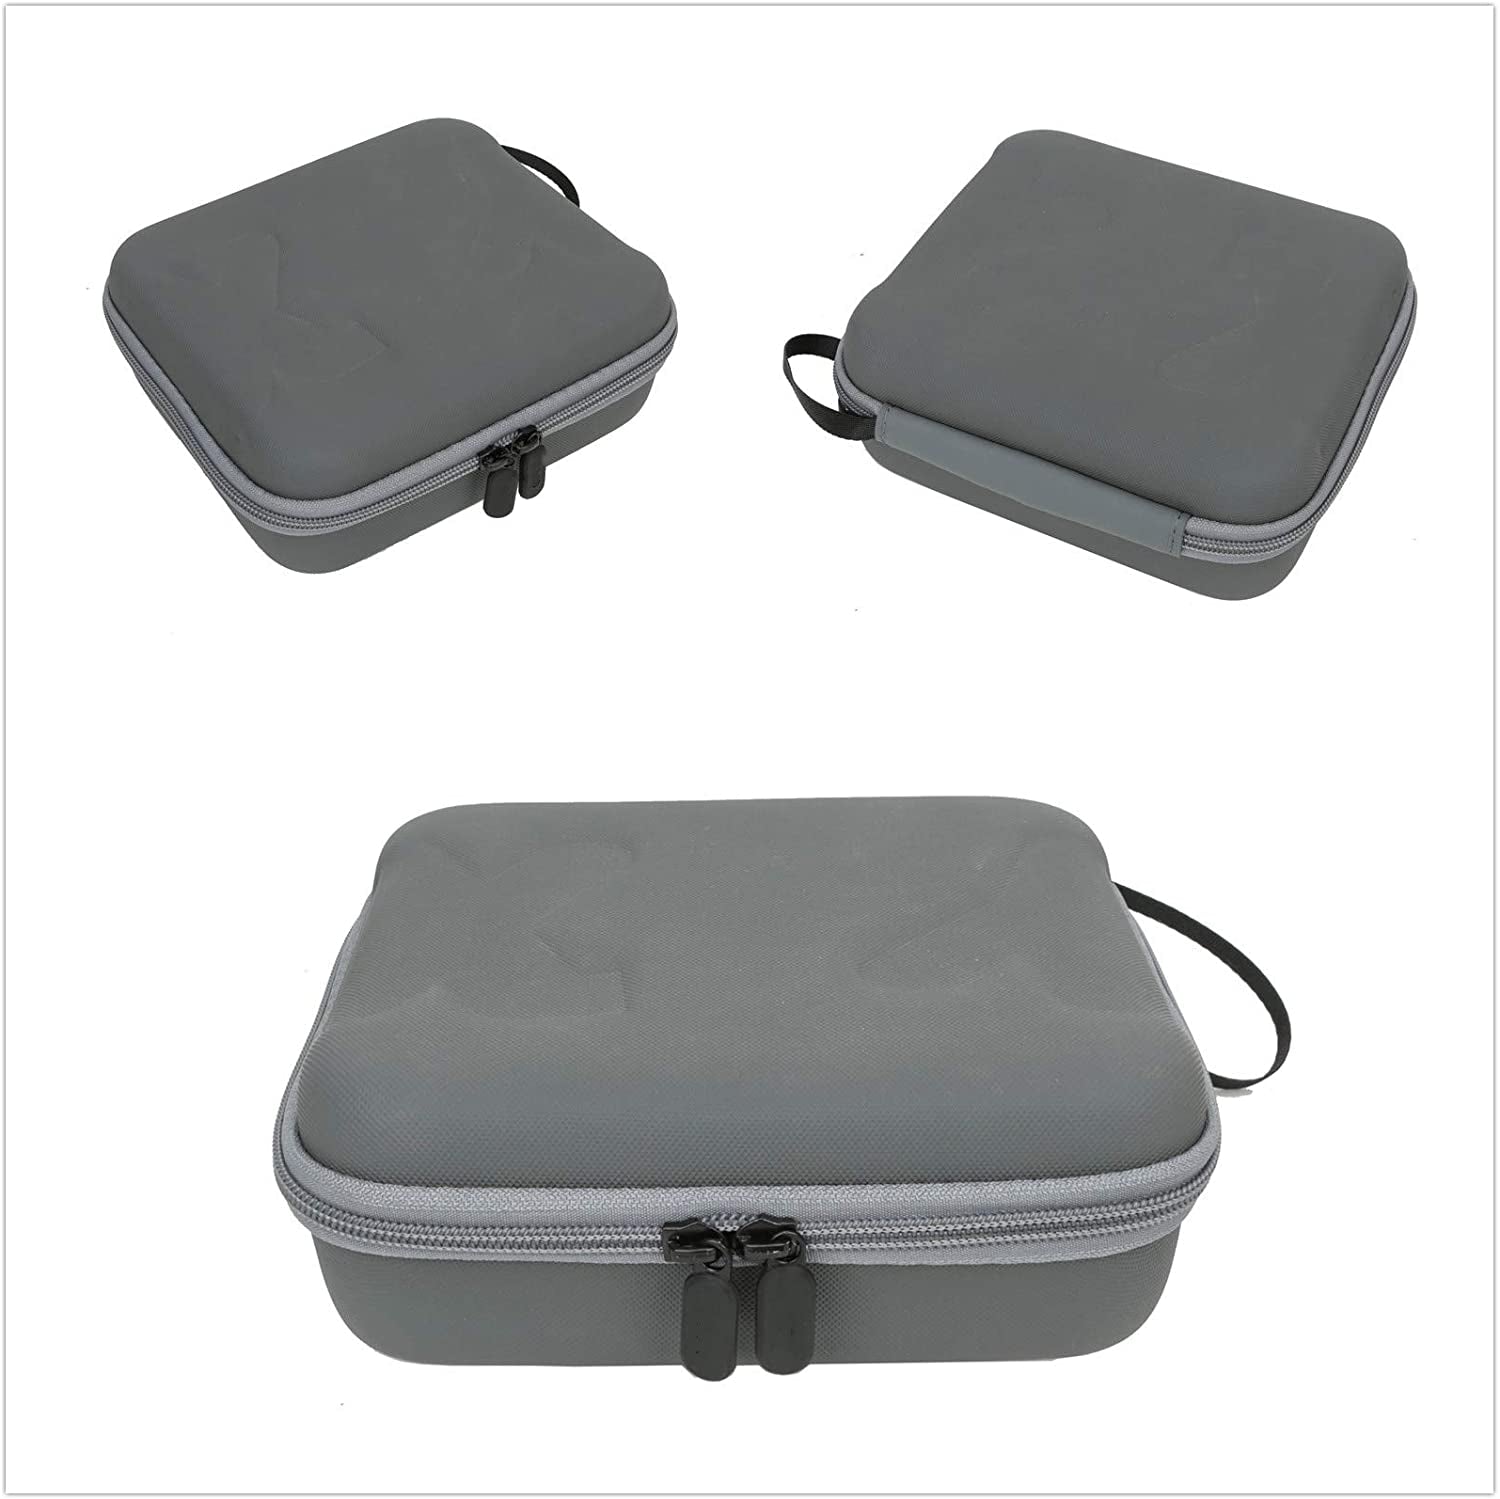 Carrying Case Storage Bag for DJI Mini 2-Newest Mini 2 Drone and Accessories